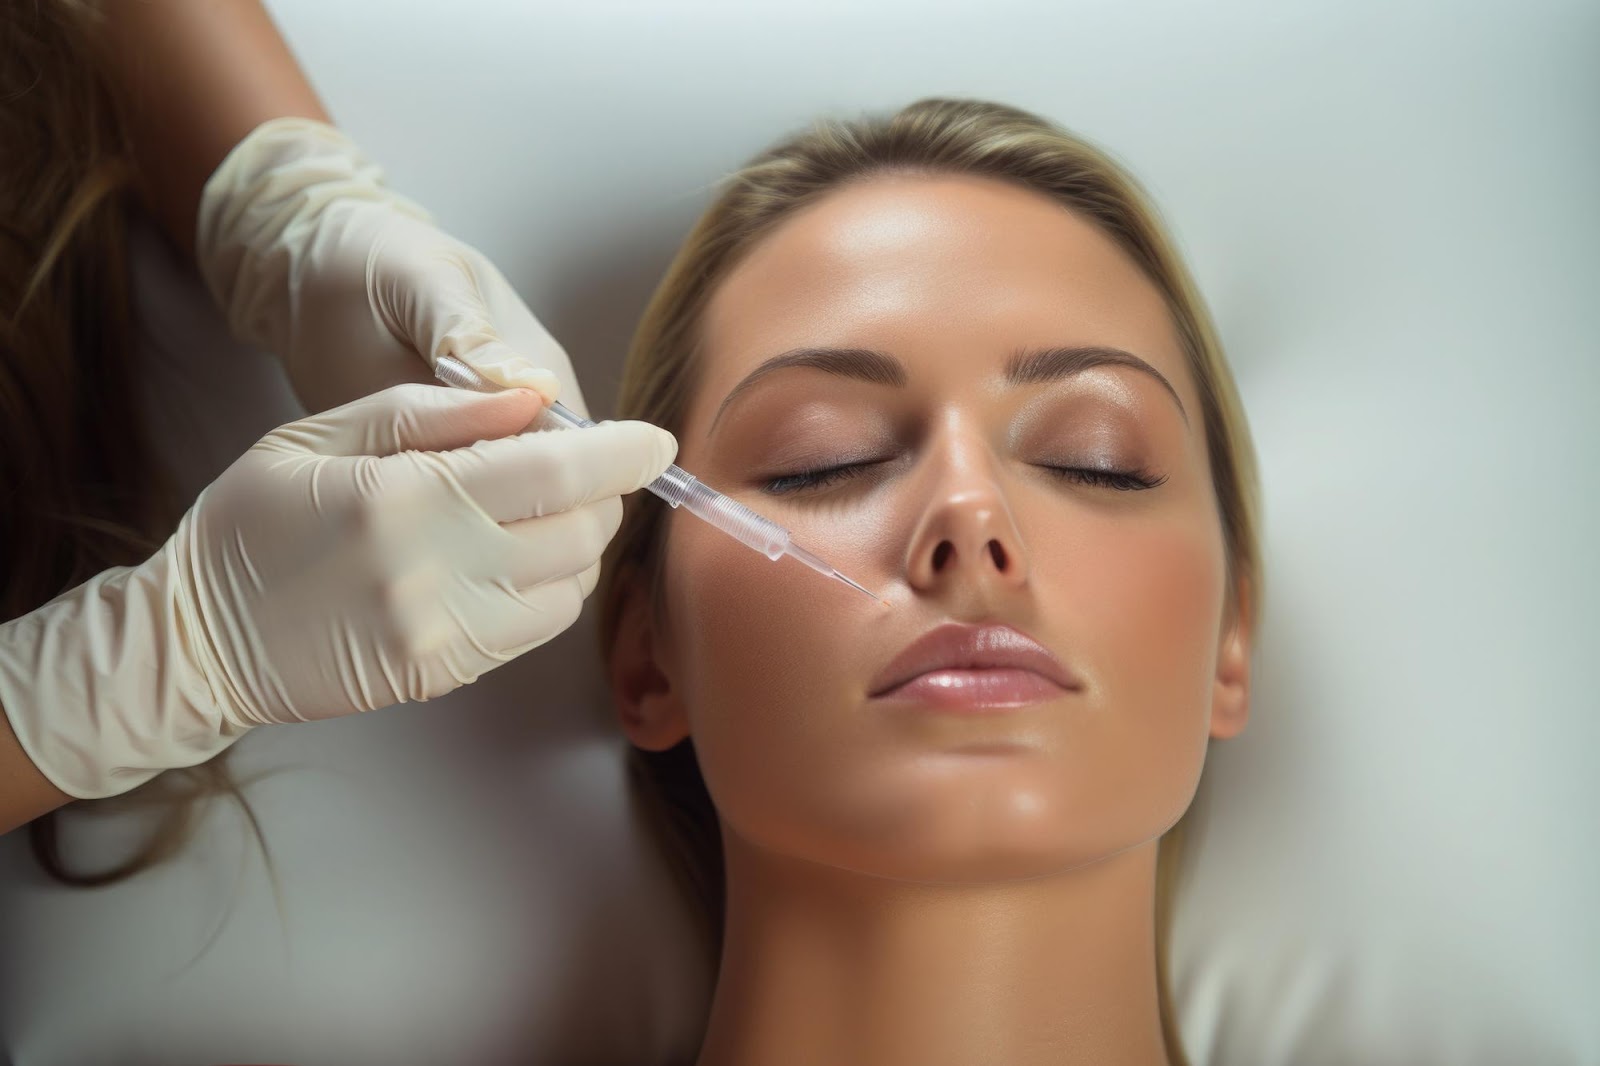 Female patient receiving filler treatment for smoother and younger-looking skin.